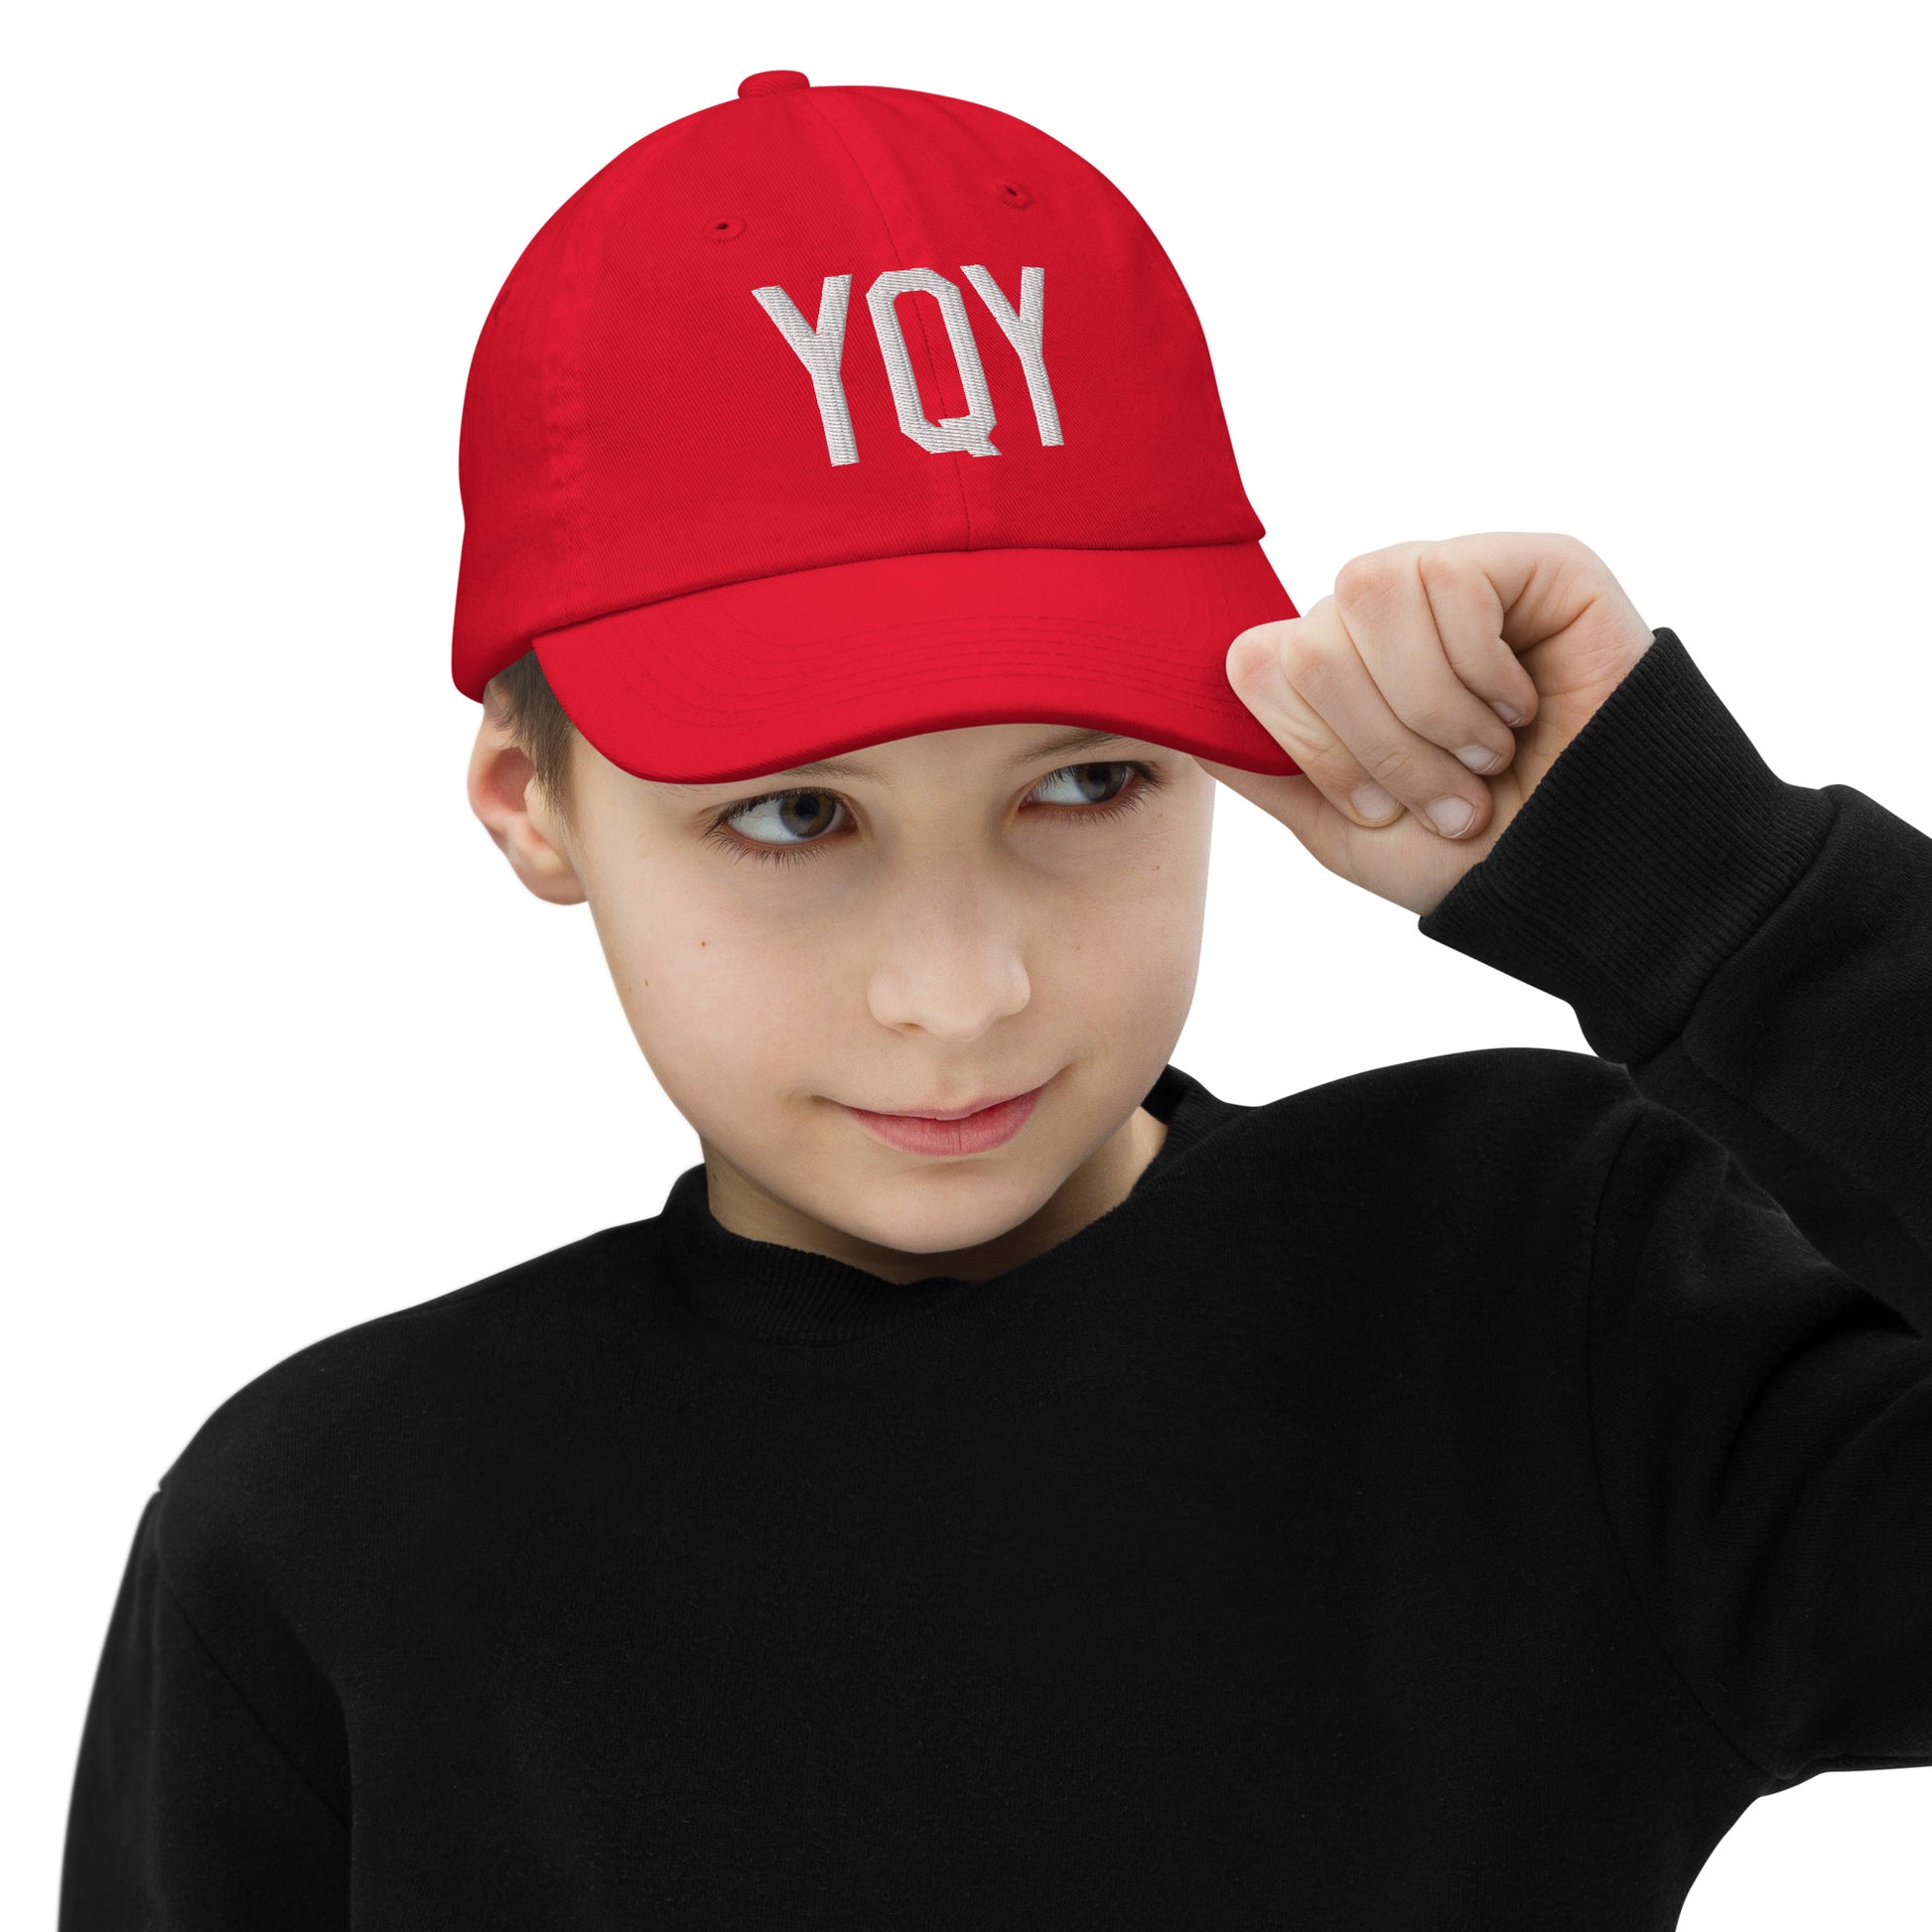 Airport Code Kid's Baseball Cap - White • YQY Sydney • YHM Designs - Image 04